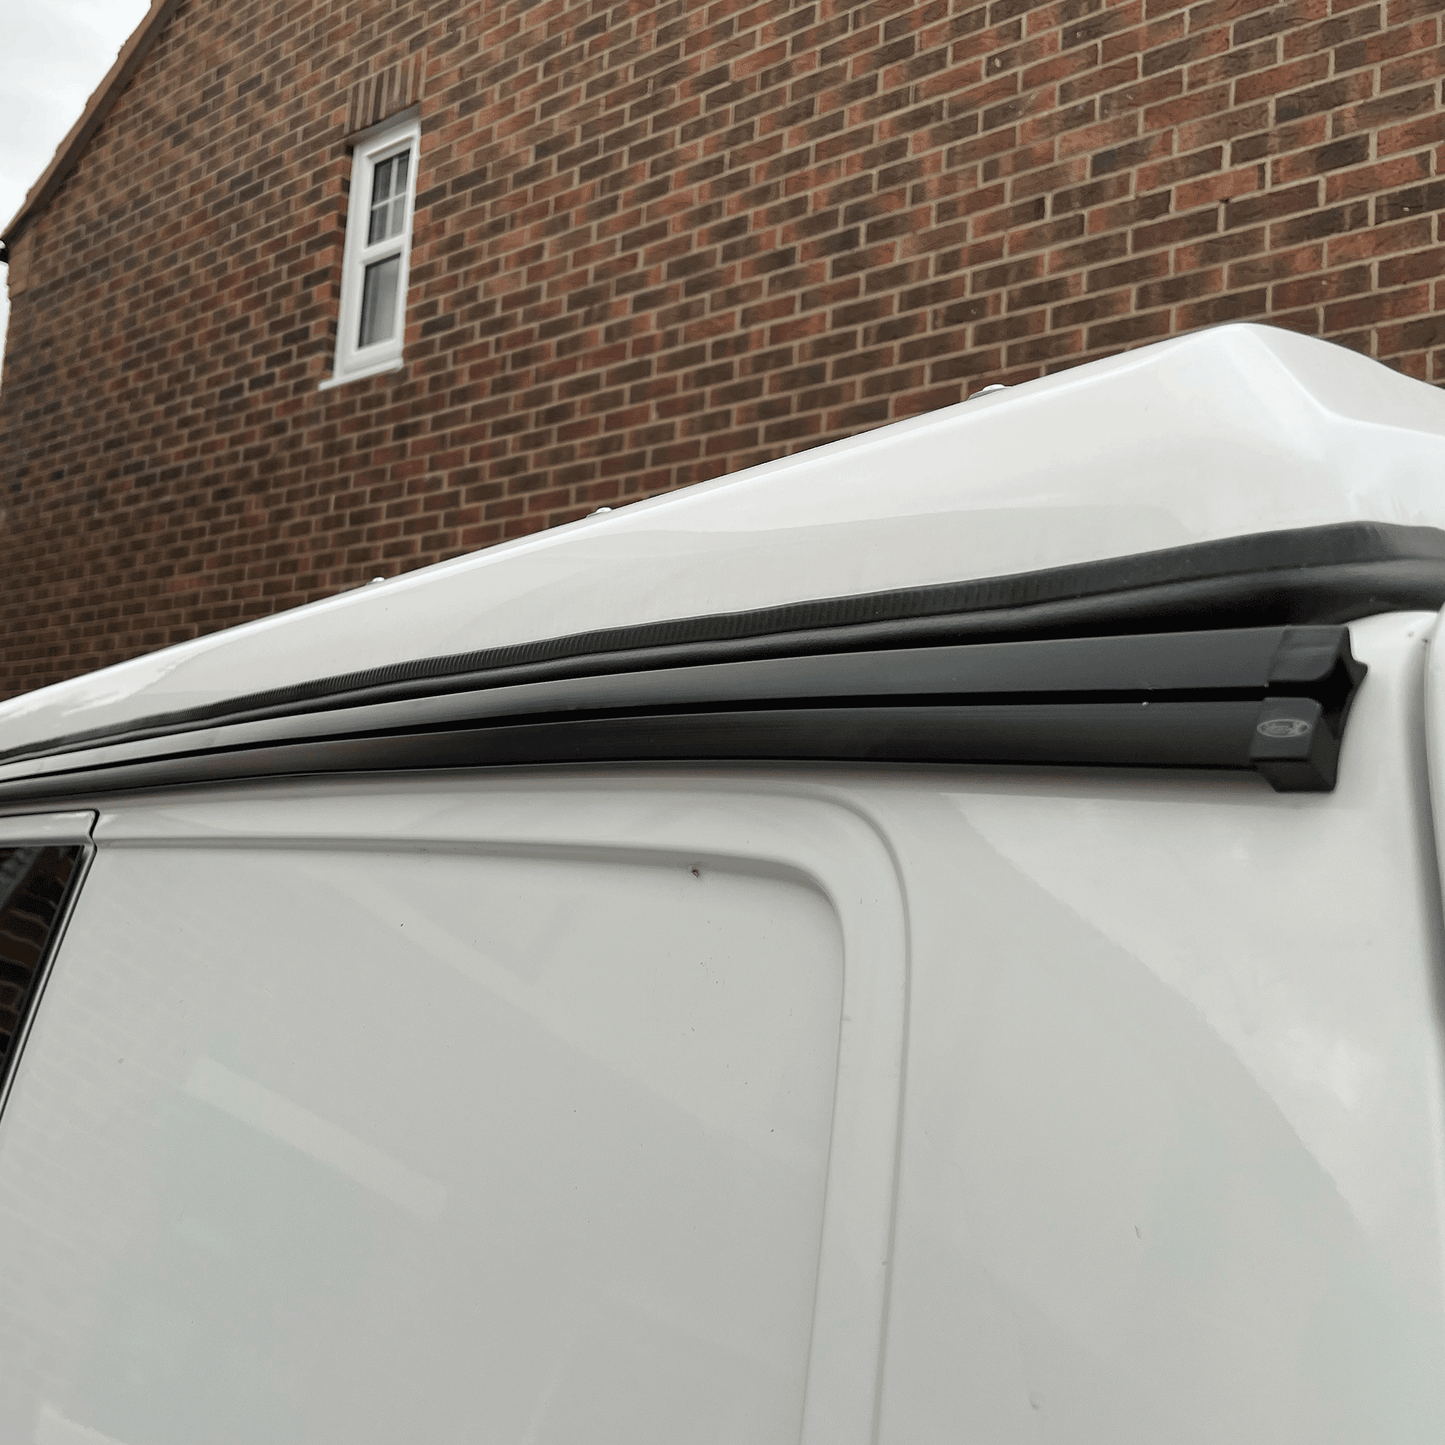 VW T6 Awning Rails (Black) Ideal for Campervan Drive-Through Awning, Compatible with Reimo Awning